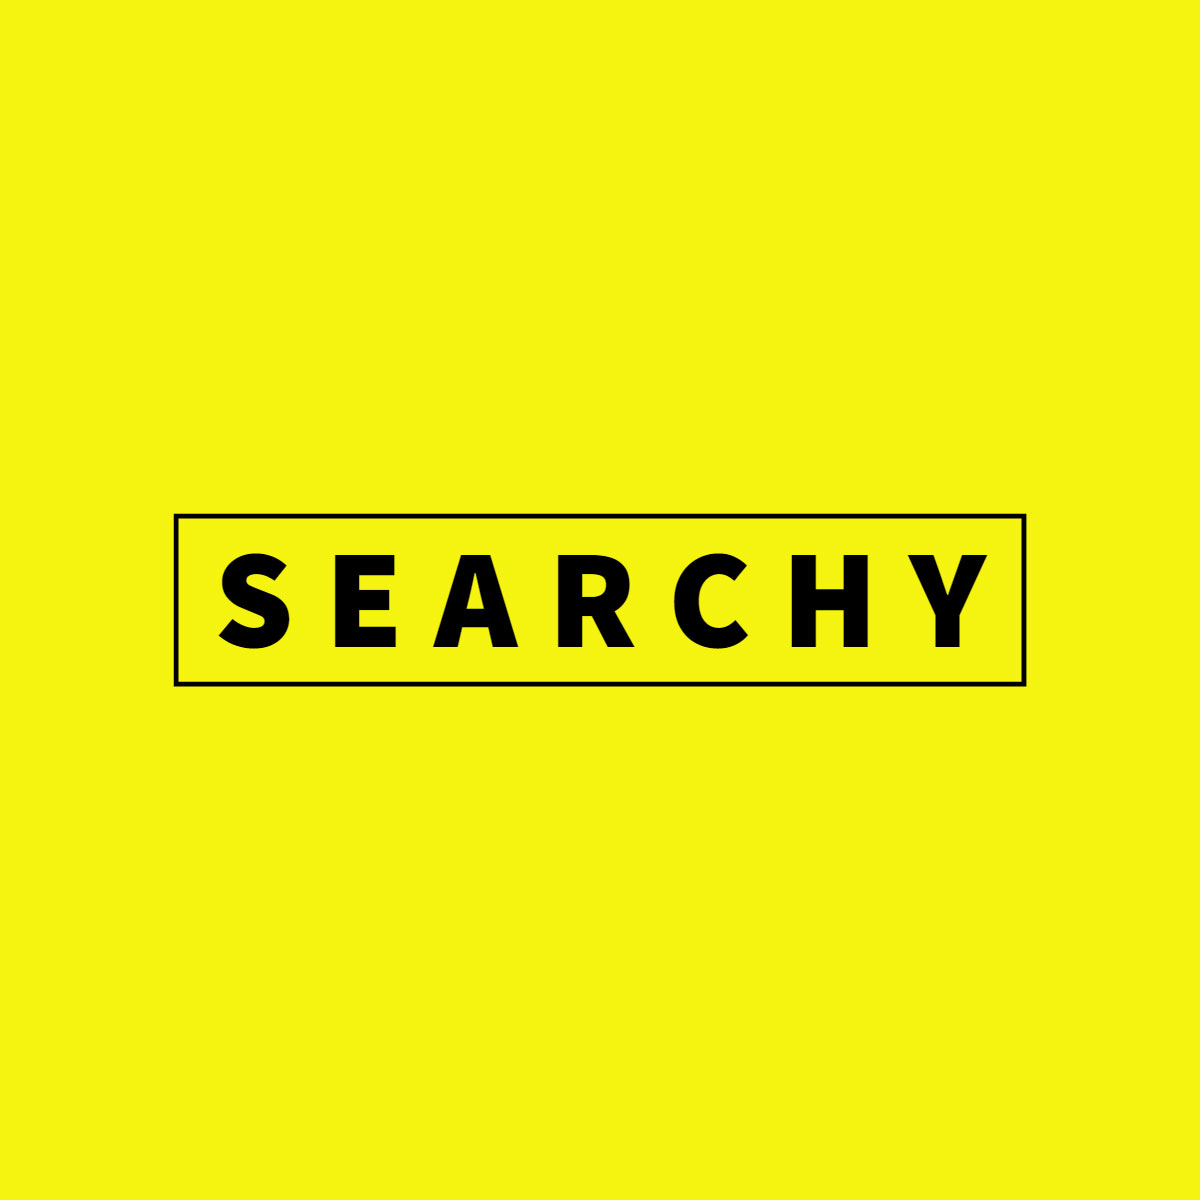 Searchy